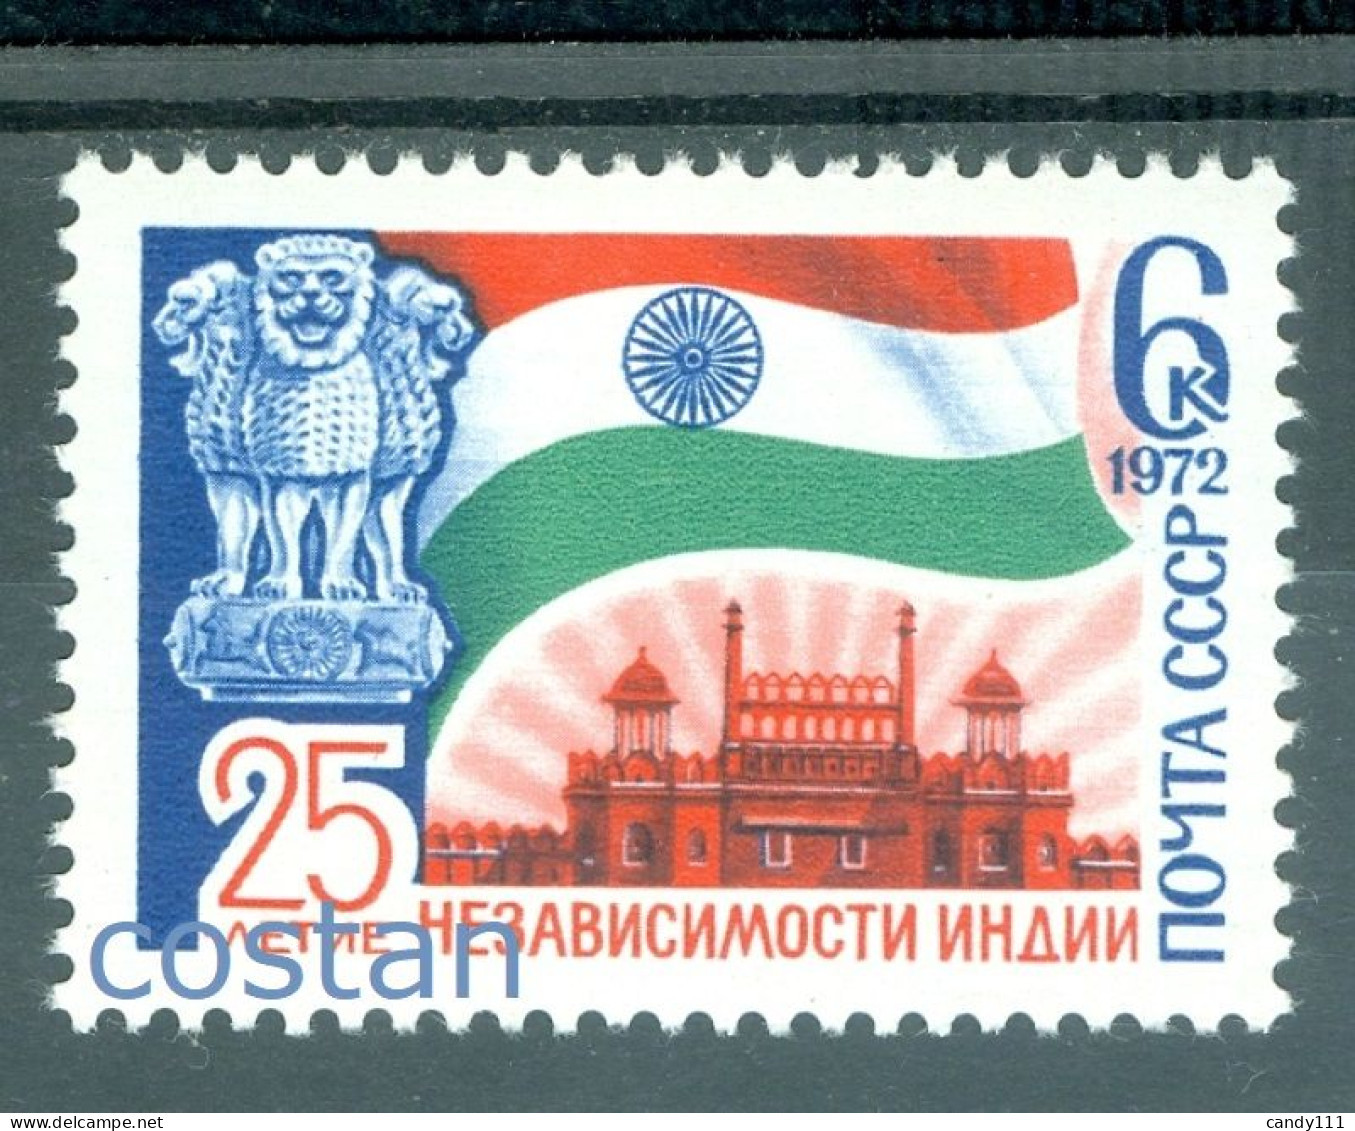 1972 INDIA Independence,Lion Capital,Flag,Red Fort/Lal Qila,Delhi,Russia,4031MNH - Châteaux